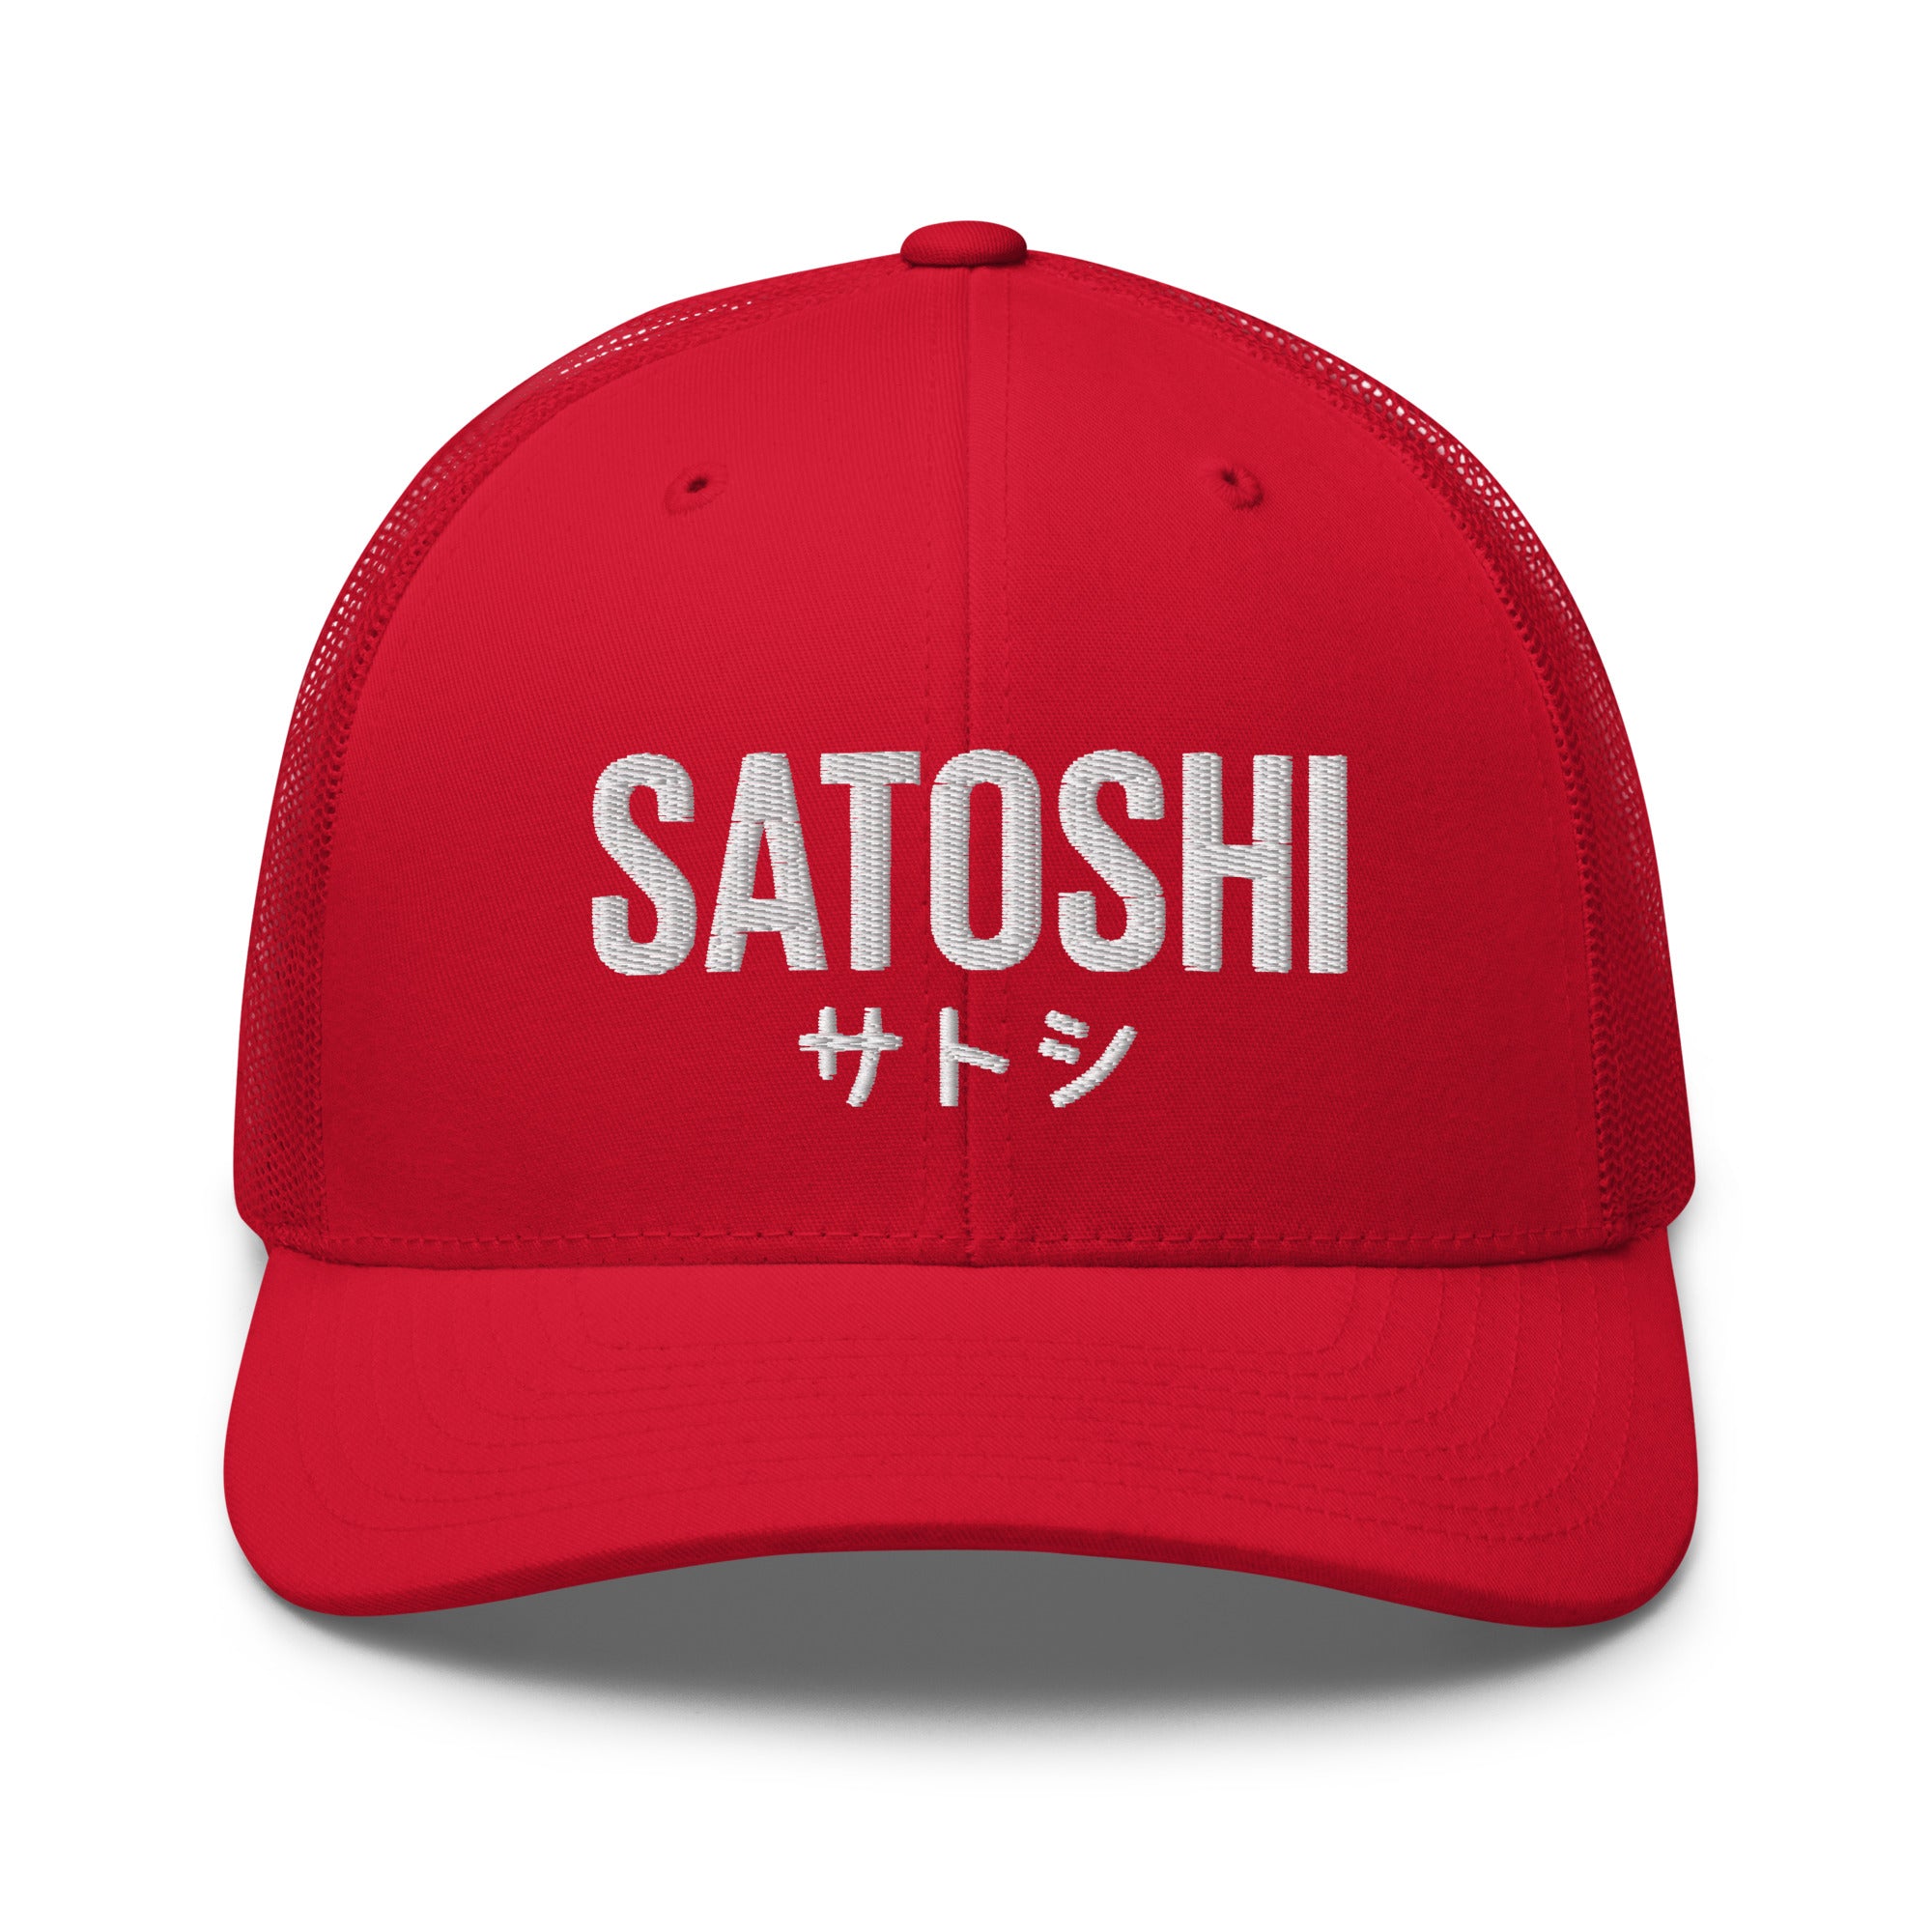 Bitcoin Headwear - The Satoshi Hat features a bilingual embroidered design. Color: Red. Front view.